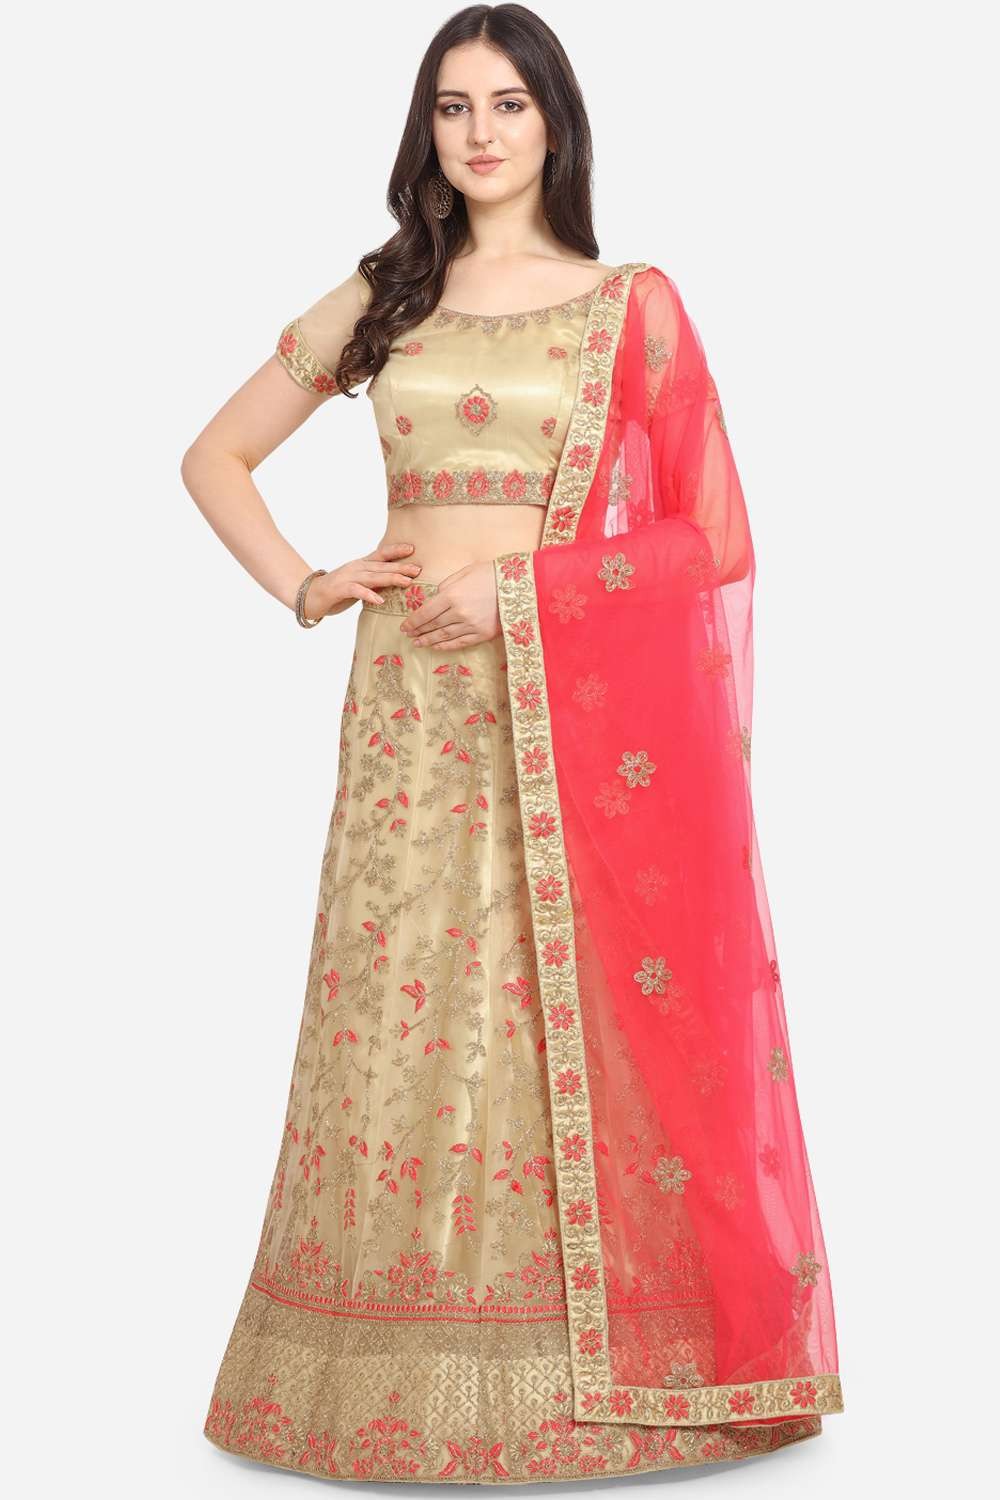 Gorgeous Baby Pink Color Georgette Lehenga Choli | Lehenga choli latest,  Designer lehenga choli, Party wear indian dresses